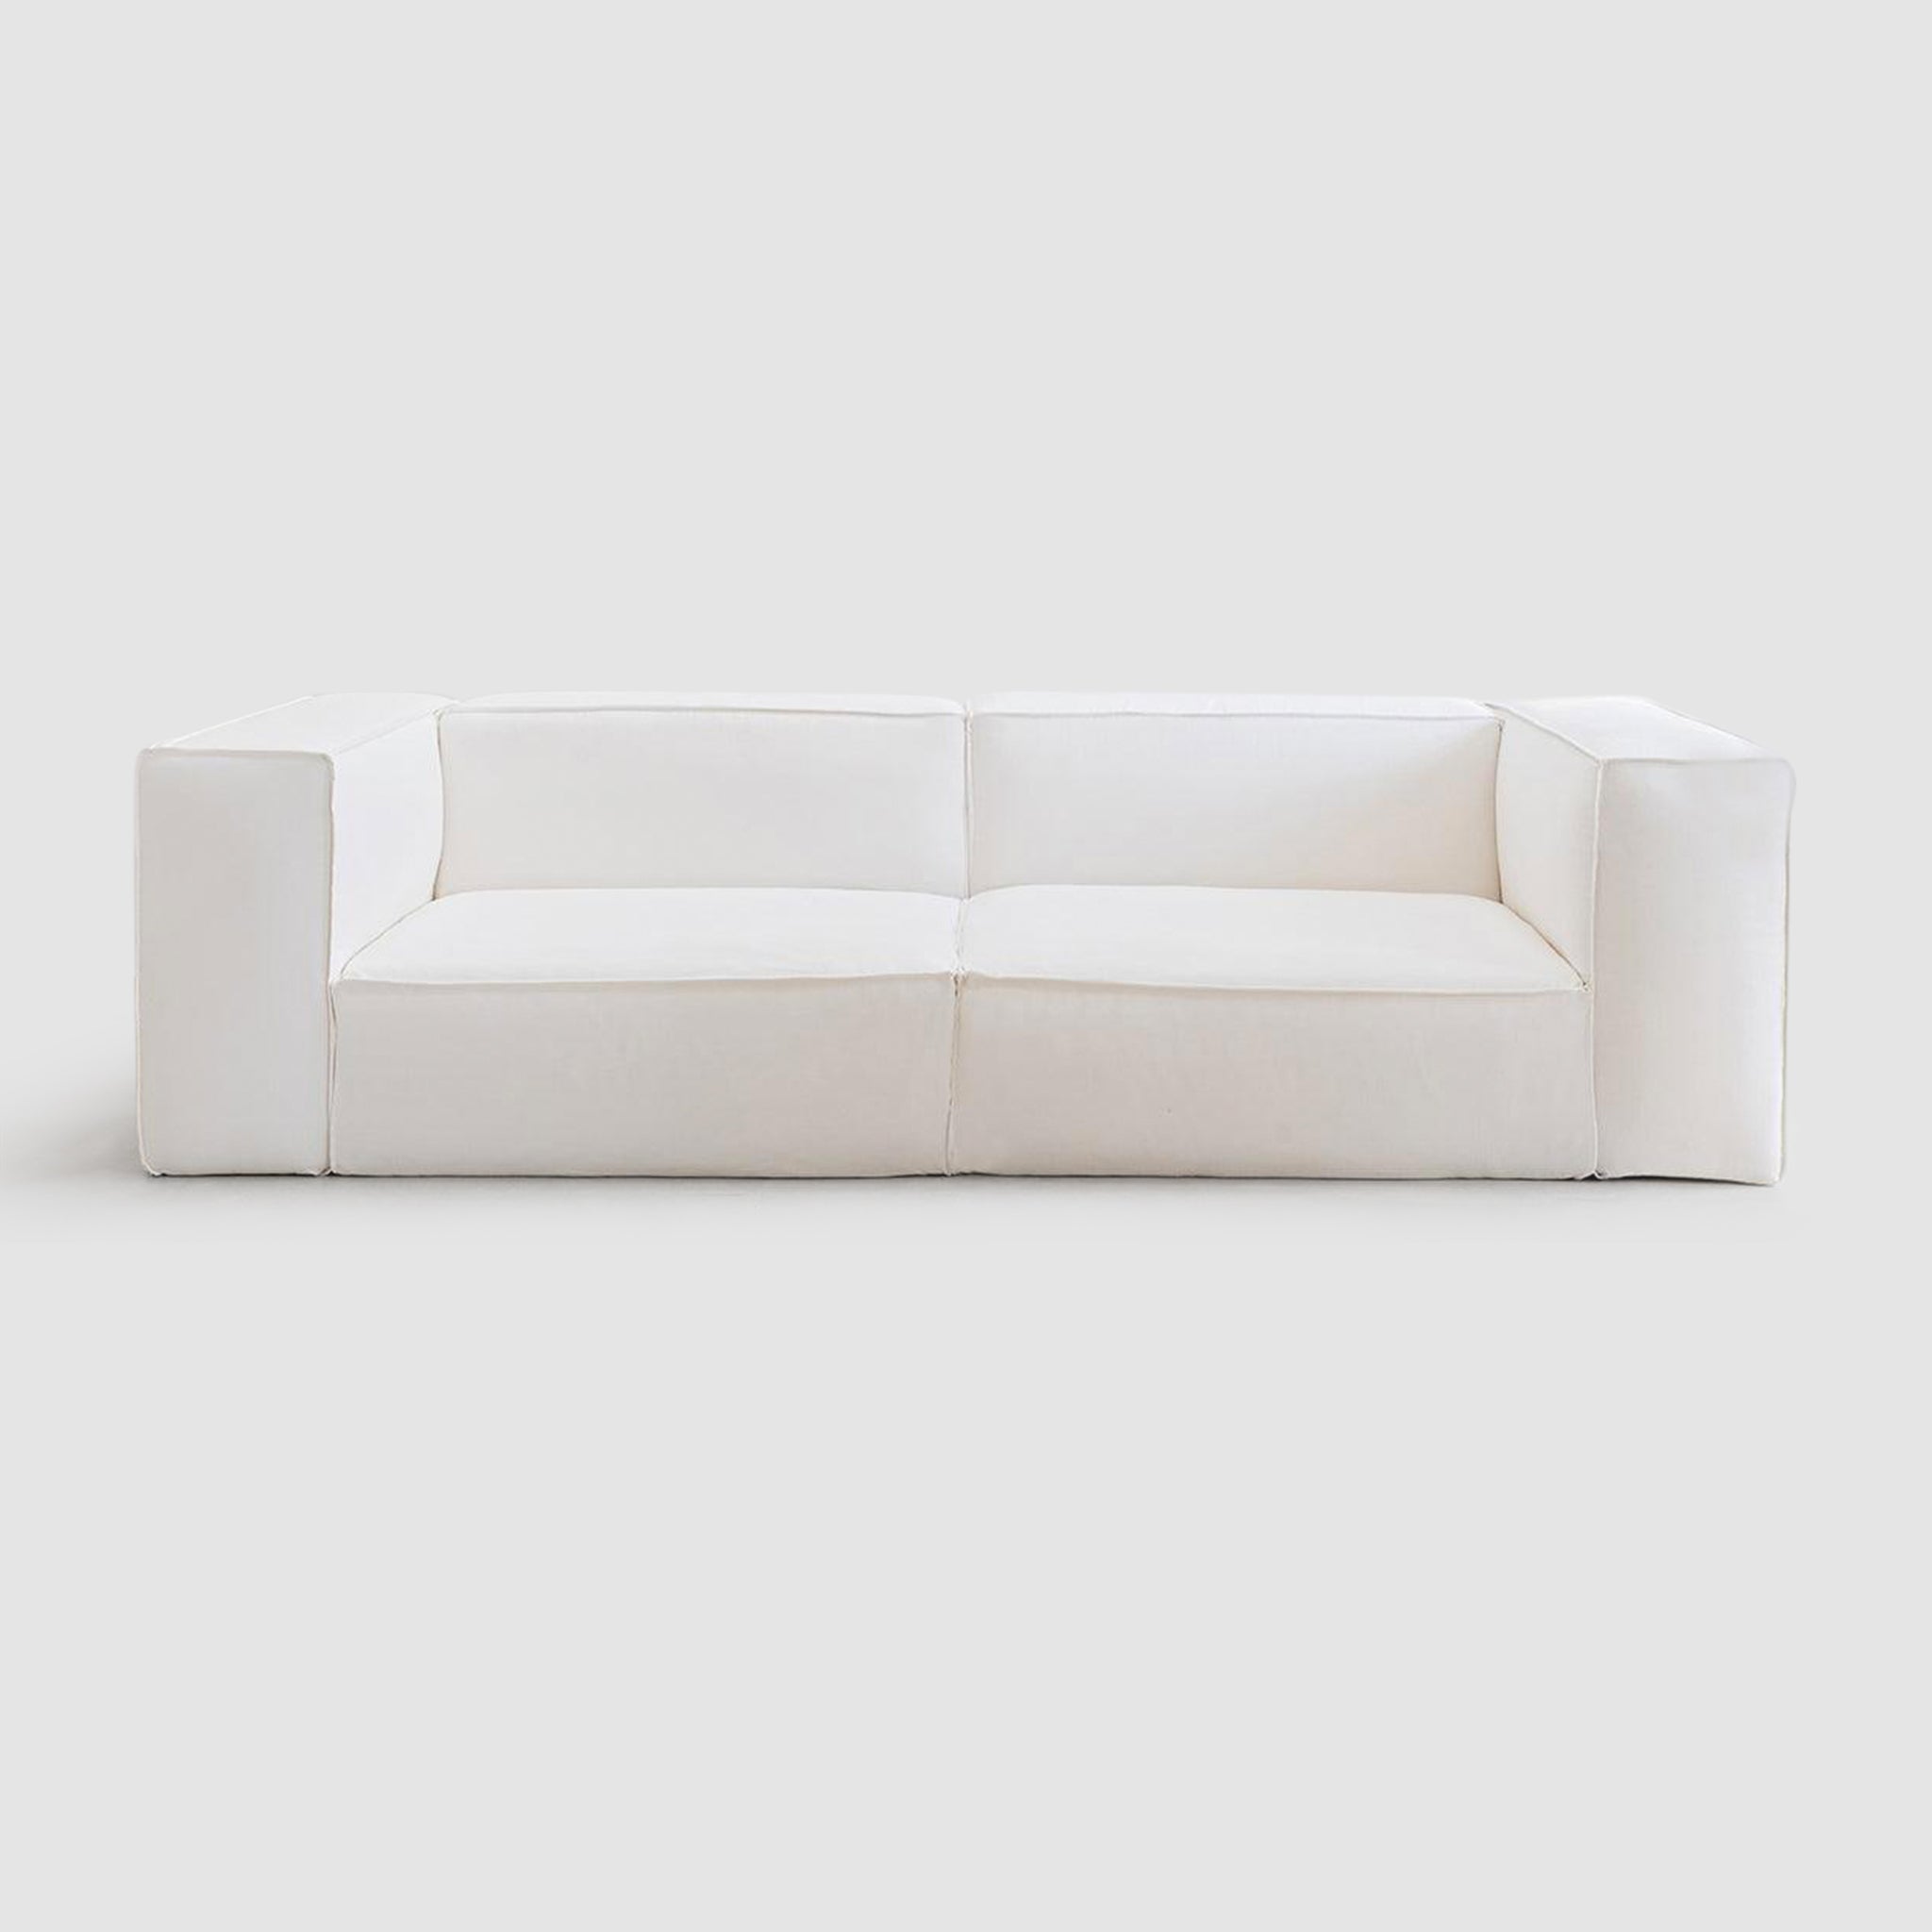 Front view of a minimalist white modular couch with wide armrests and plush cushions, perfect for modern living room decor.